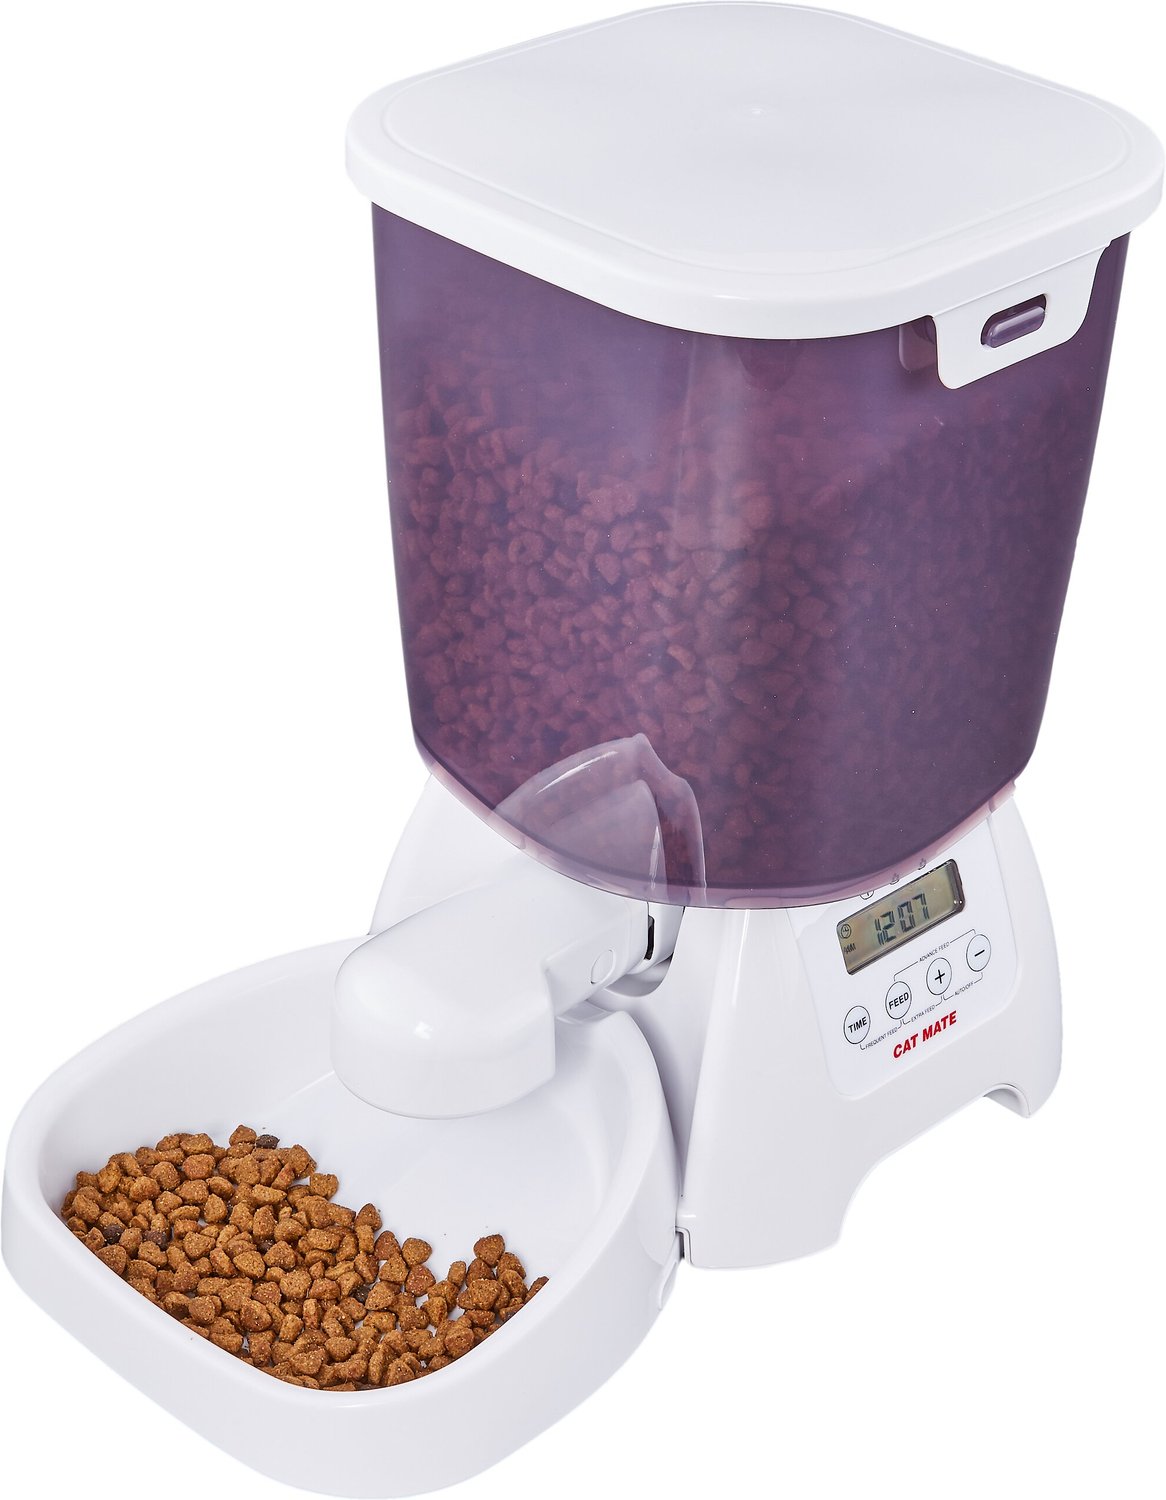 Kinematica Materialisme aangrenzend CAT MATE C3000 Automatic Dog & Cat Feeder, 26-cup - Chewy.com